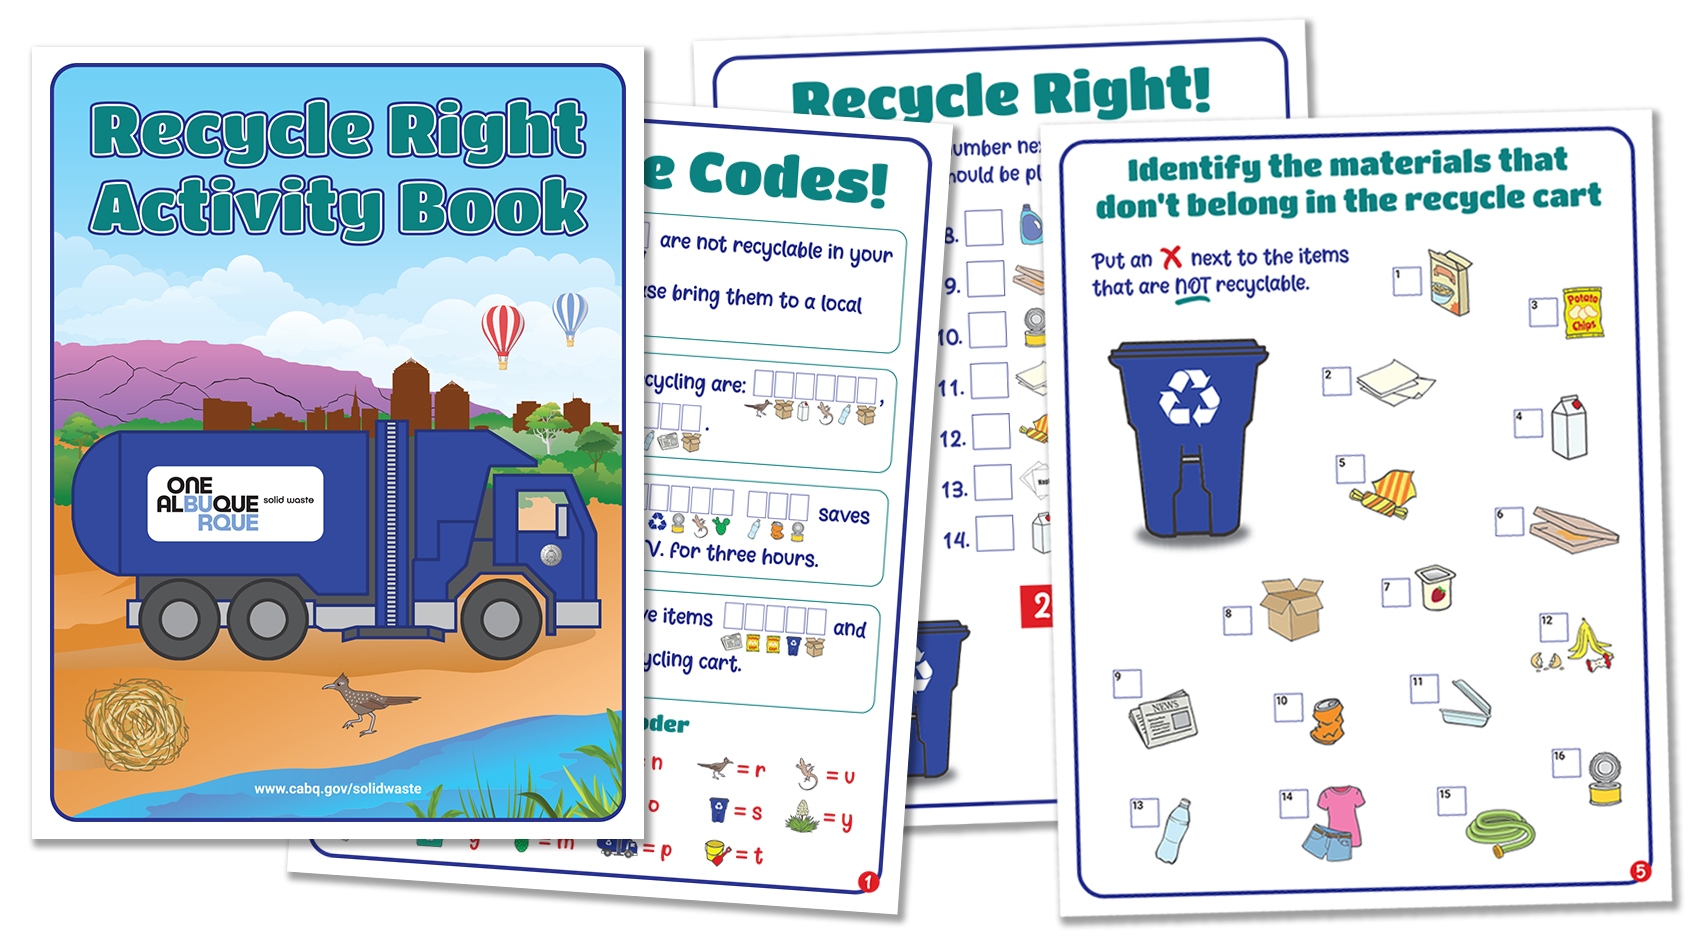 City of Albuquerque's Recycle Right Activity Book